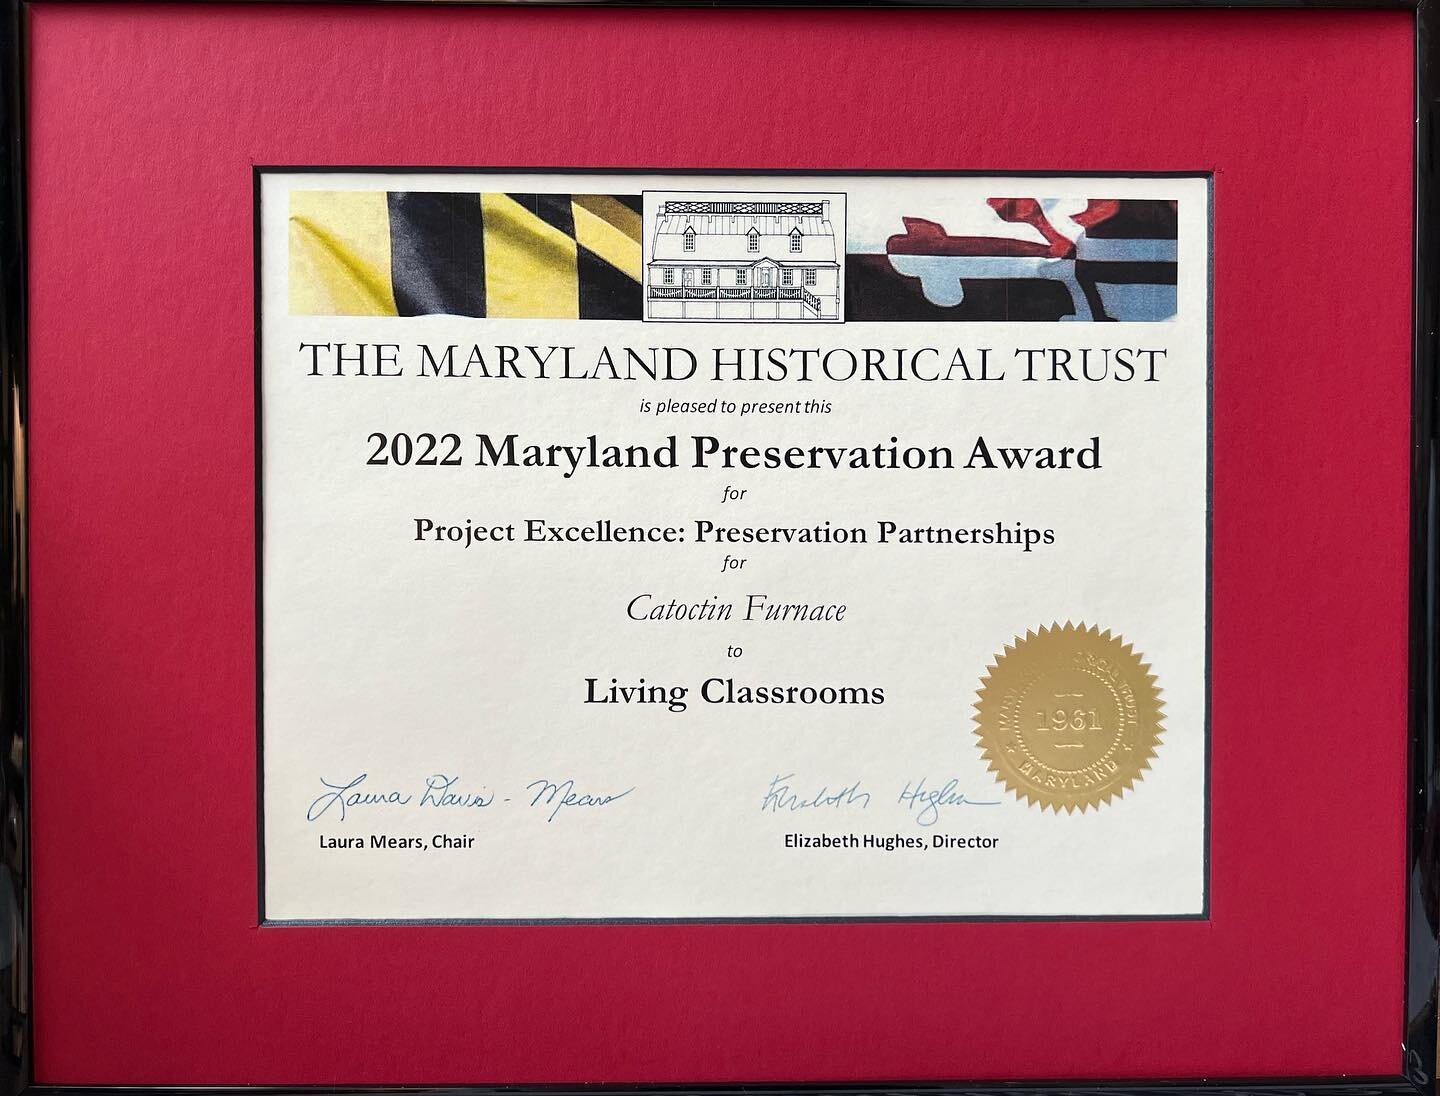 Thrilled to start the year off with this award from @mdhistoricaltrust 👏 👏 👏 

If you haven&rsquo;t been to @catoctinfurnace or @catoctinnps, it&rsquo;s well worth a visit! Our Fresh Start students assisted with preservation efforts, earning this 